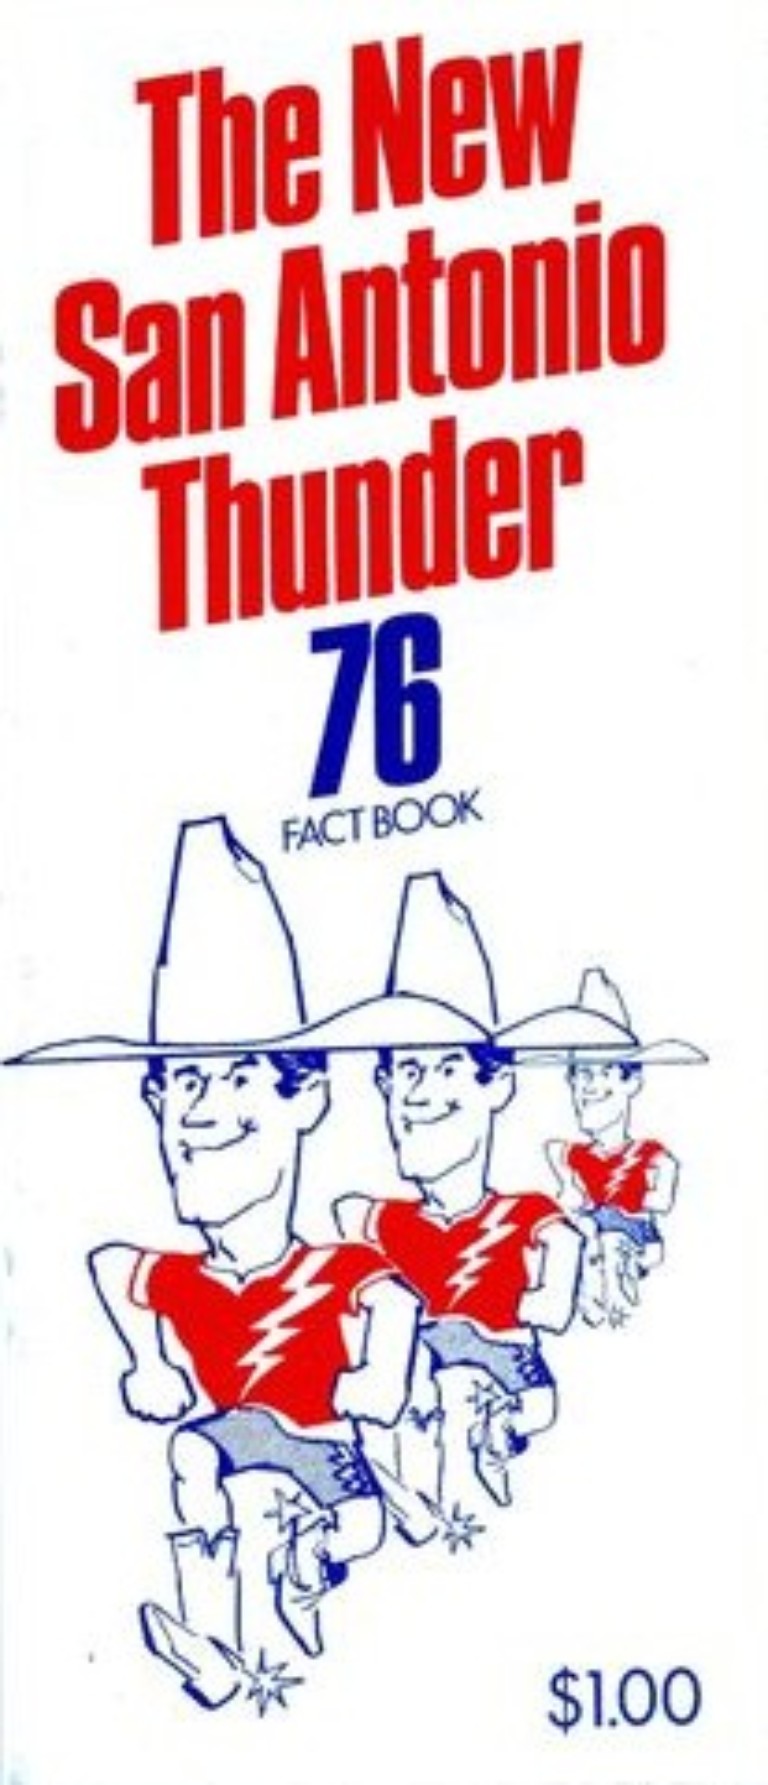 1976 San Antonio Thunder media guide from the North American Soccer League